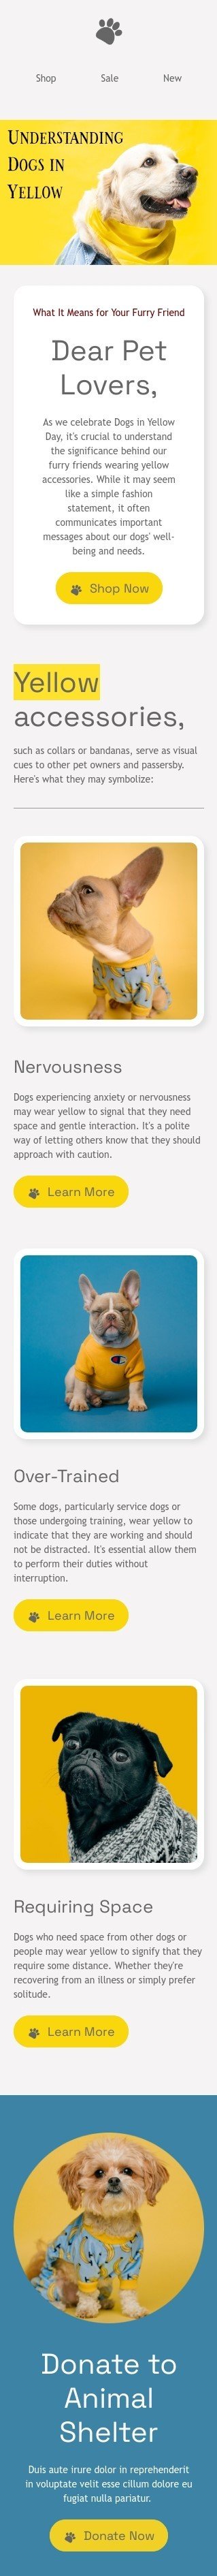 Dogs in Yellow Day email template "Understanding dogs in yellow" for pets industry mobile view